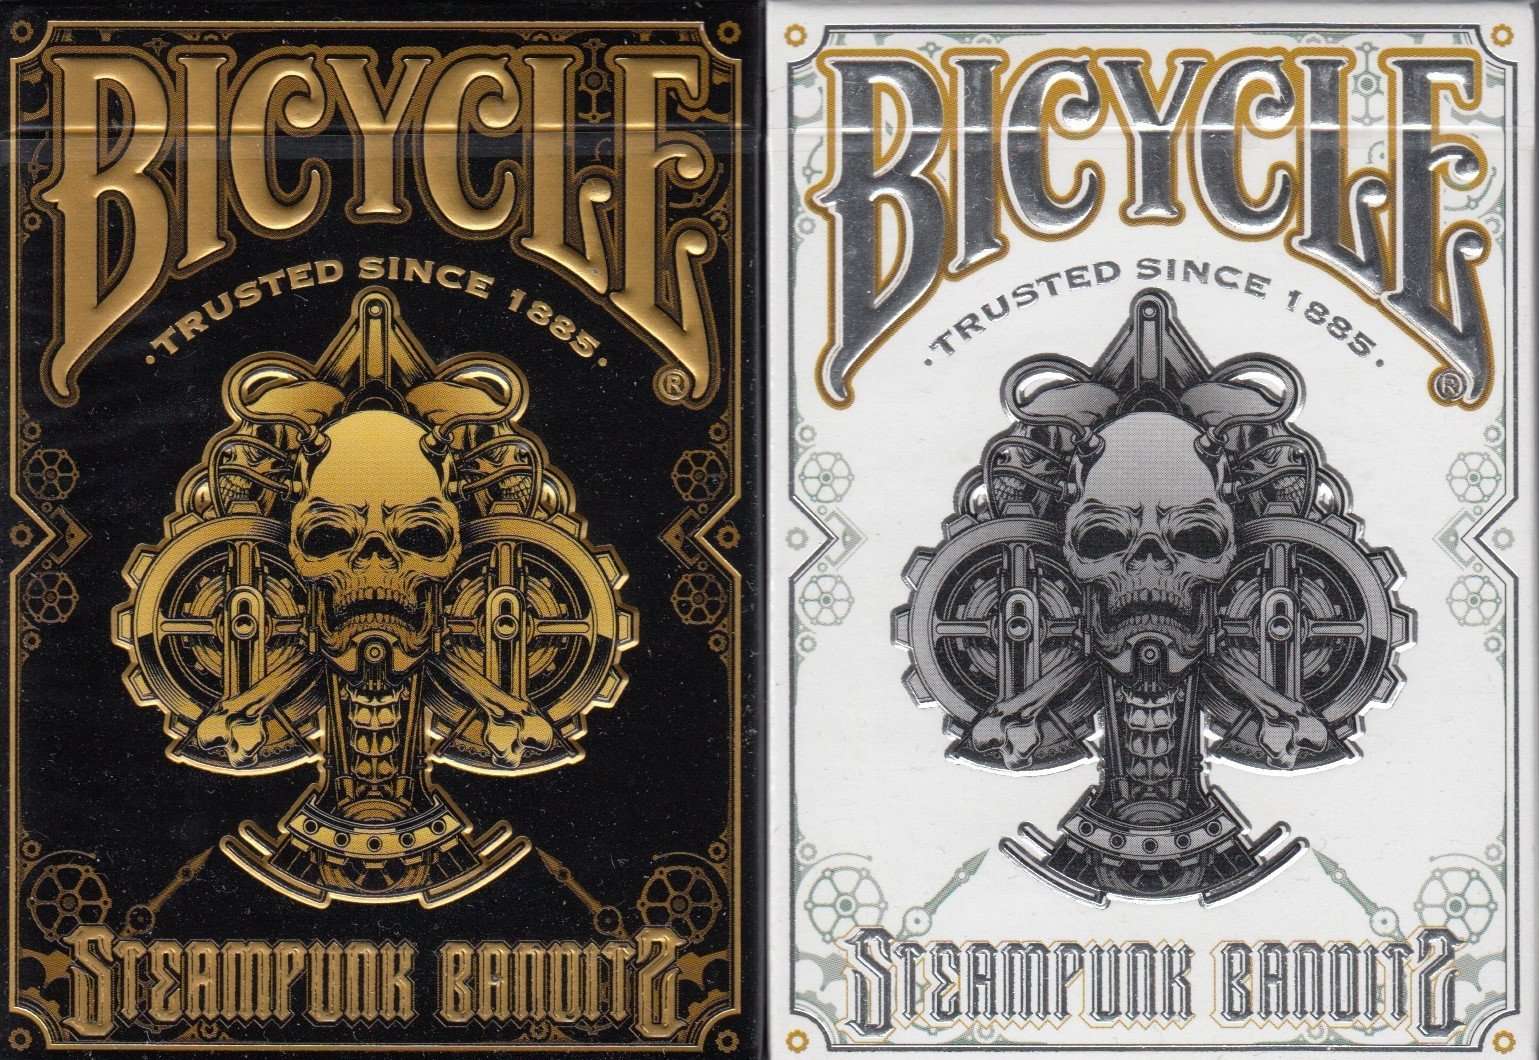 Steampunk Bandits Bicycle Playing Cards - Black & White